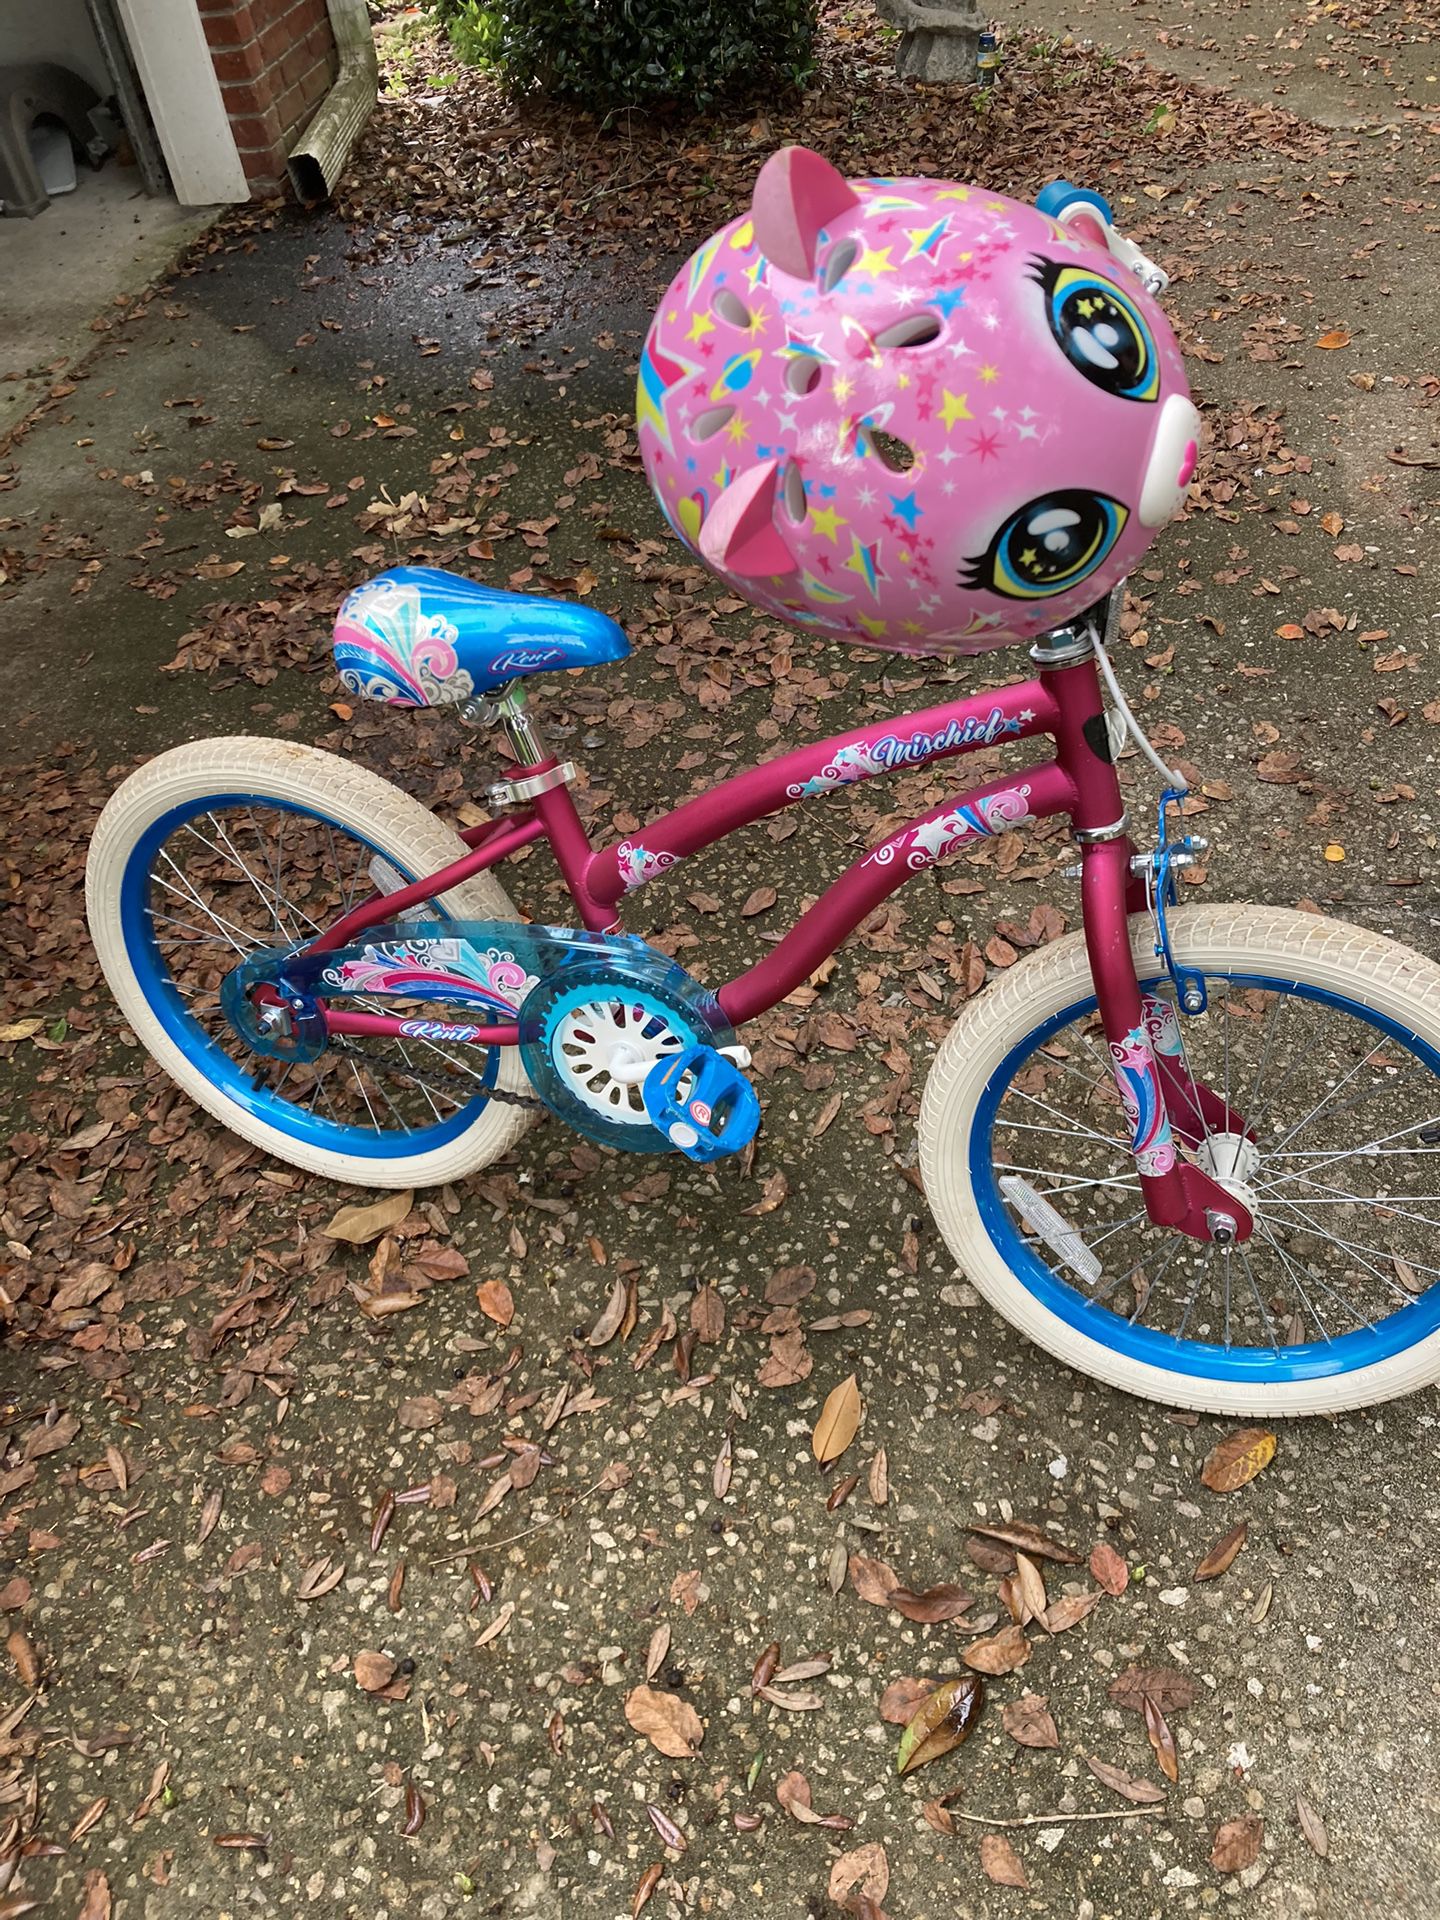 $60 Youth Bike/ Bicycle And Toddler Tricycle With Helmet